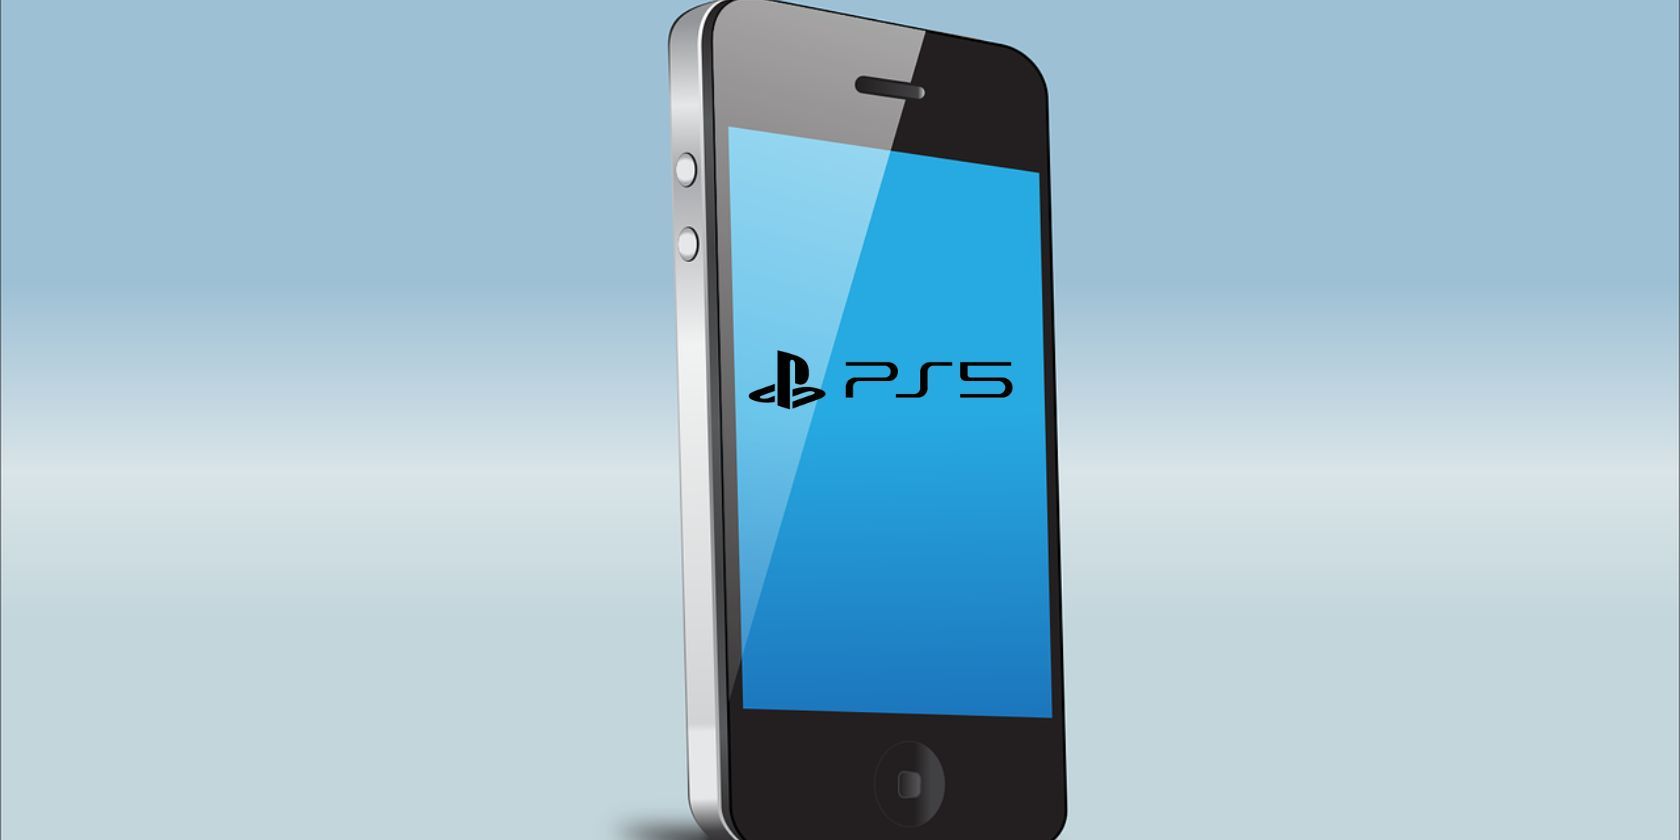 An image of a phone with the PlayStation 5 logo superimposed onto the screen